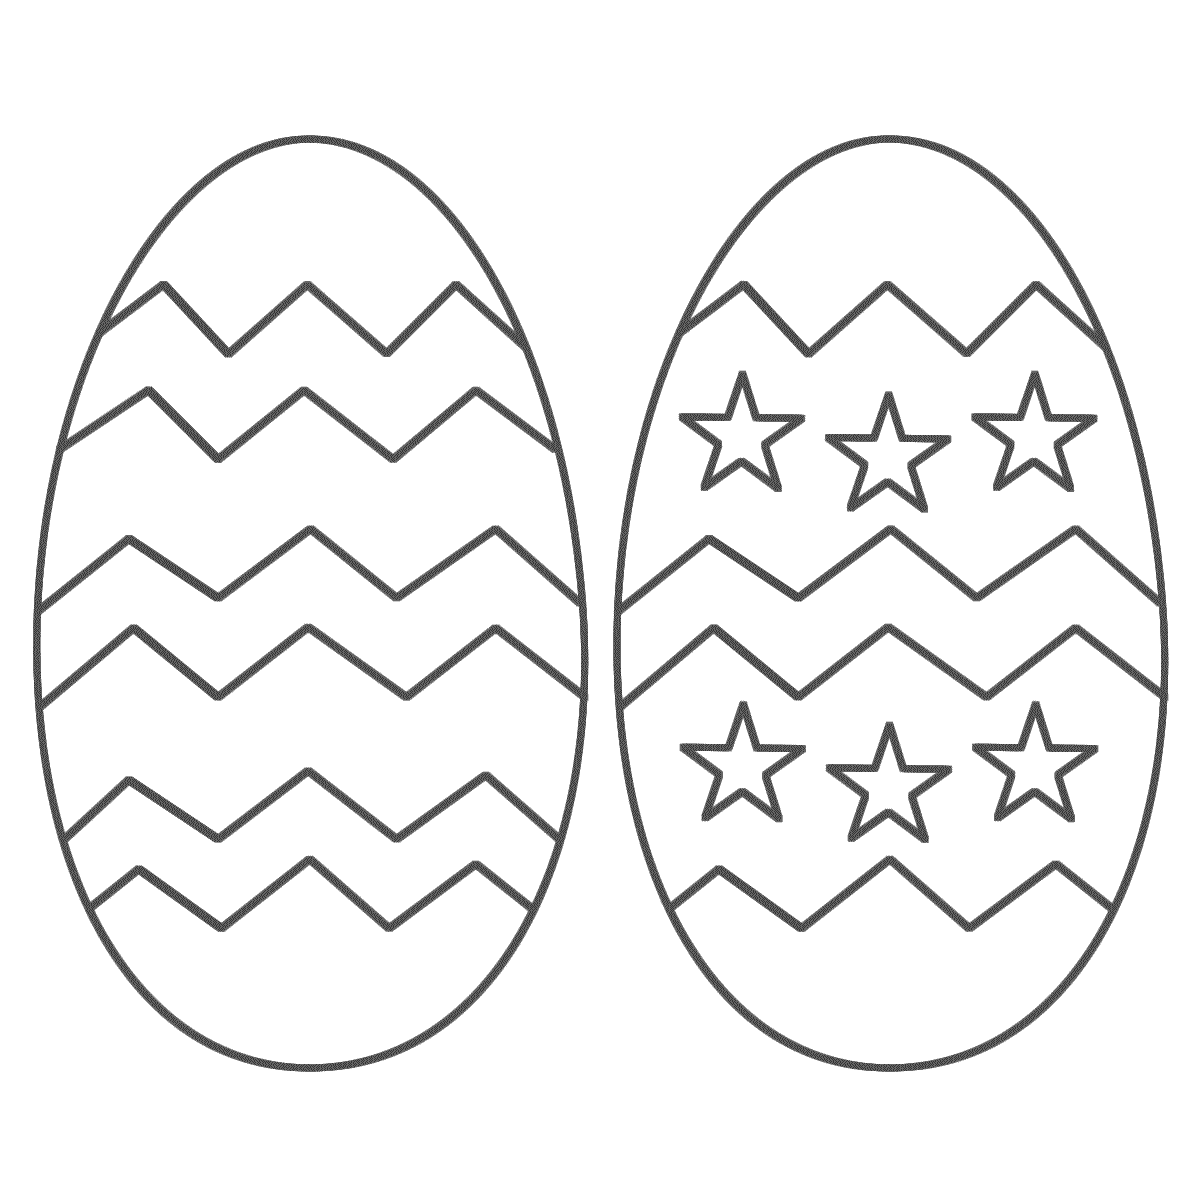 Free Printable Easter Egg Coloring Pages   Only Coloring Pages ...